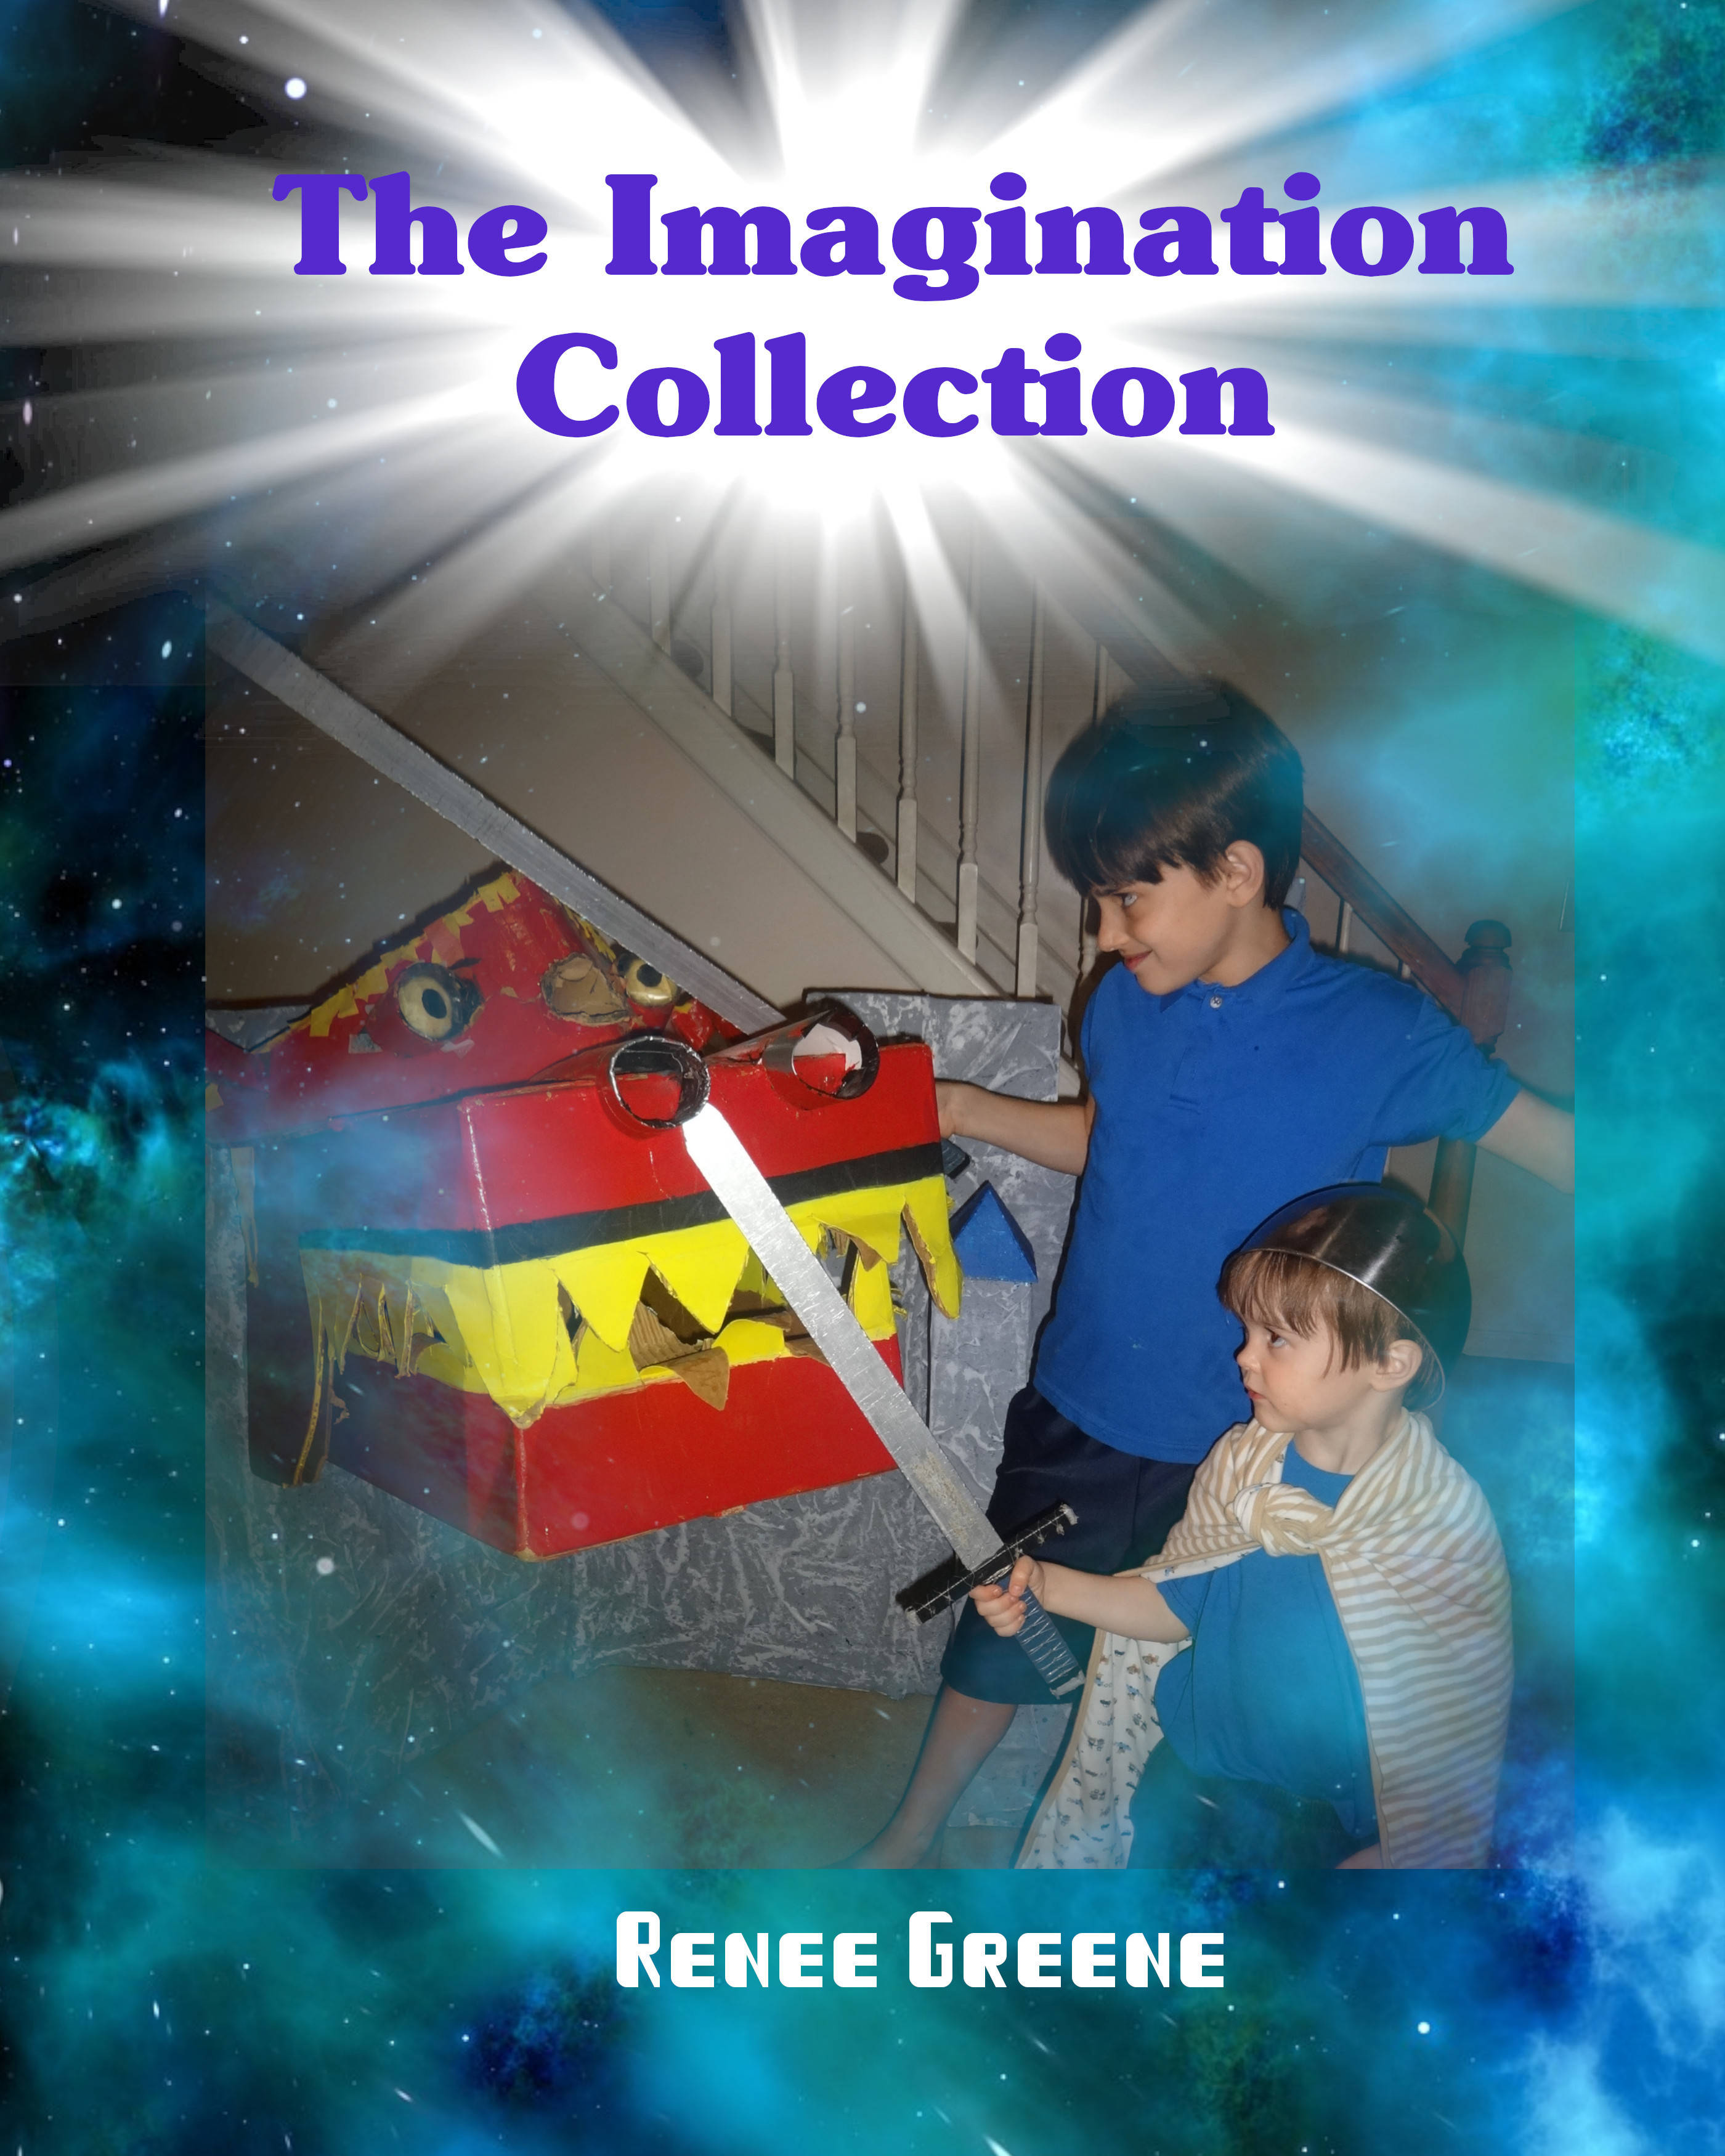 The Imagination Collection